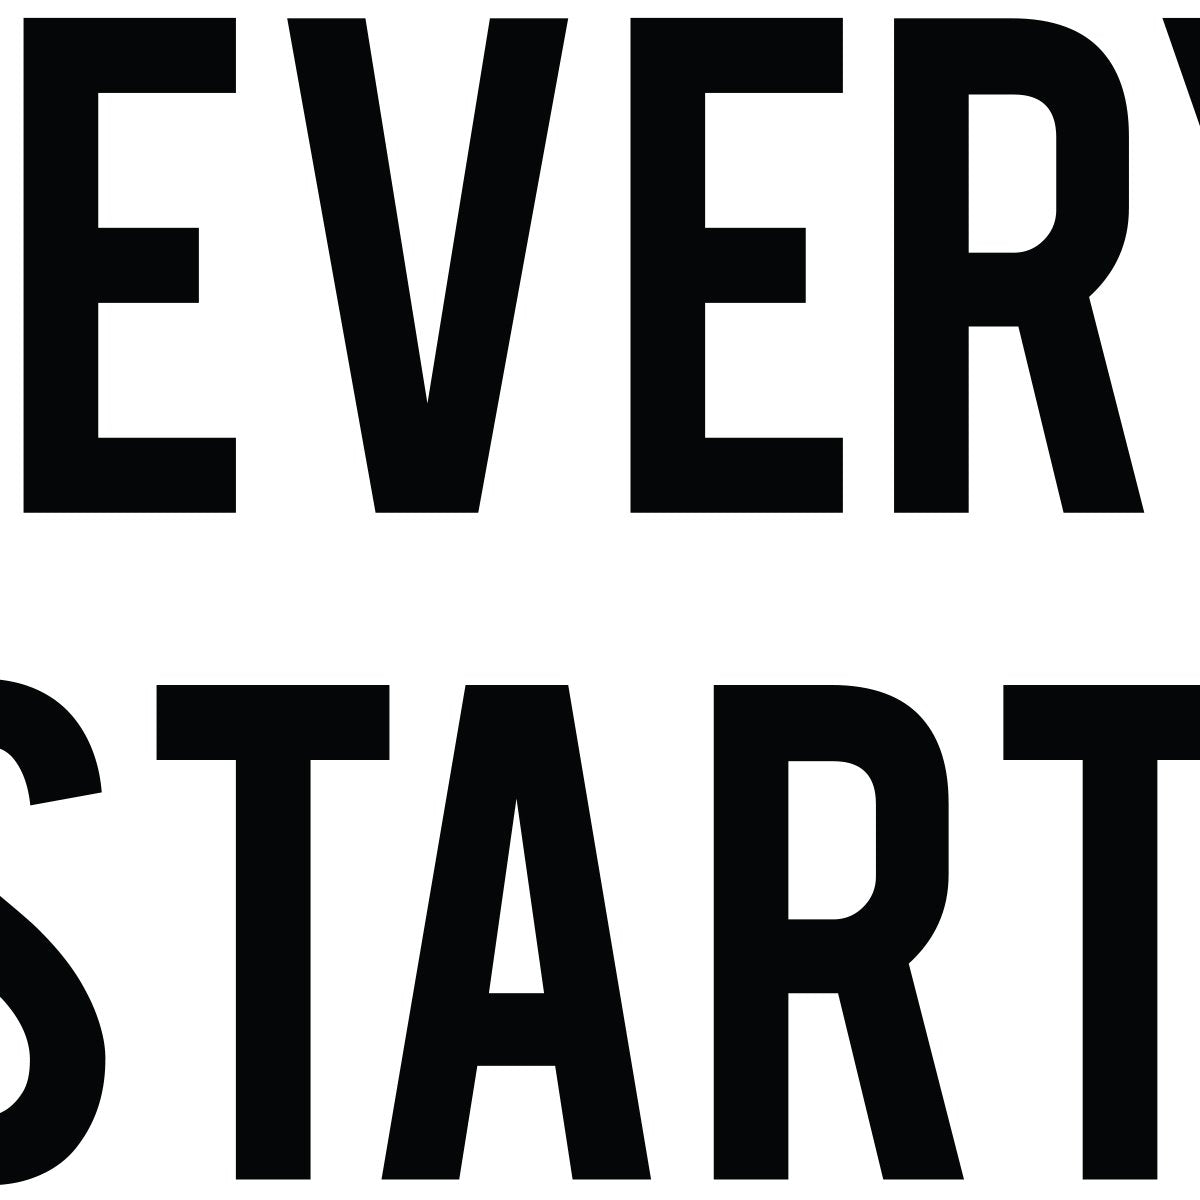 Everything Starts From A Dot Quote Poster